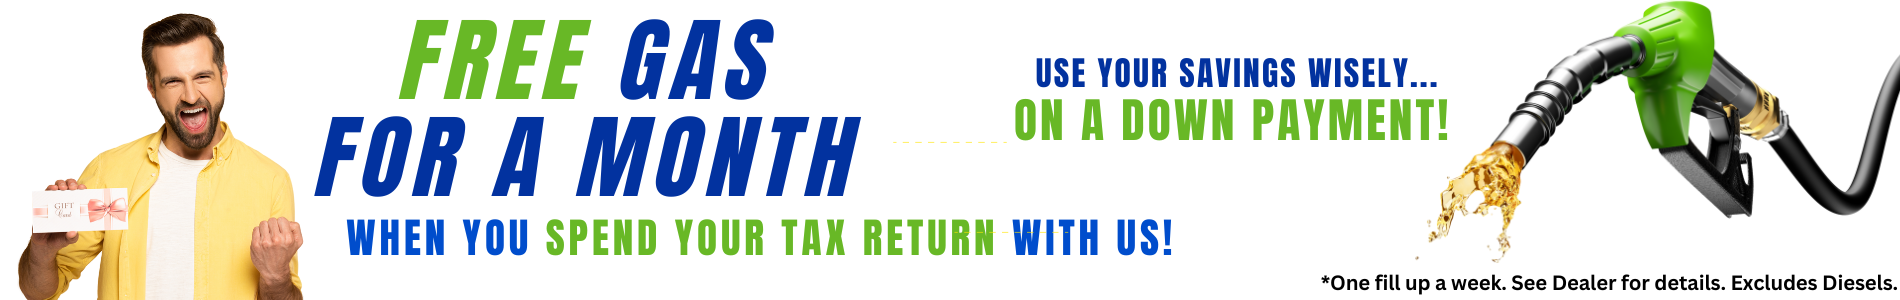 Free gas for a month when you spend your tax return with us 